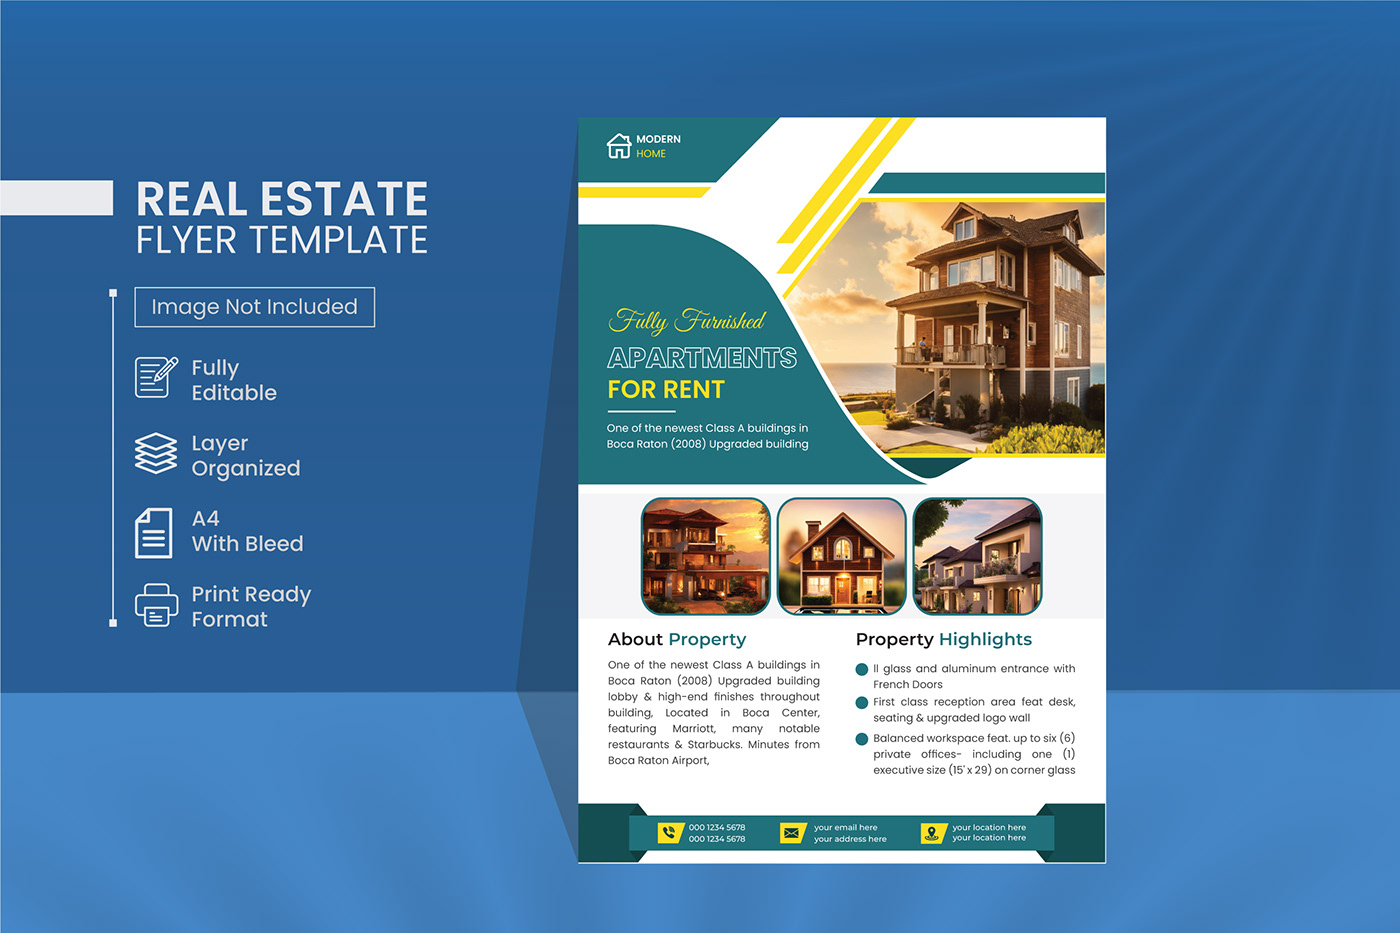 Flyer Design flyers posters Advertising  creative flyer design Travel Flyer realestate flyer corporate business